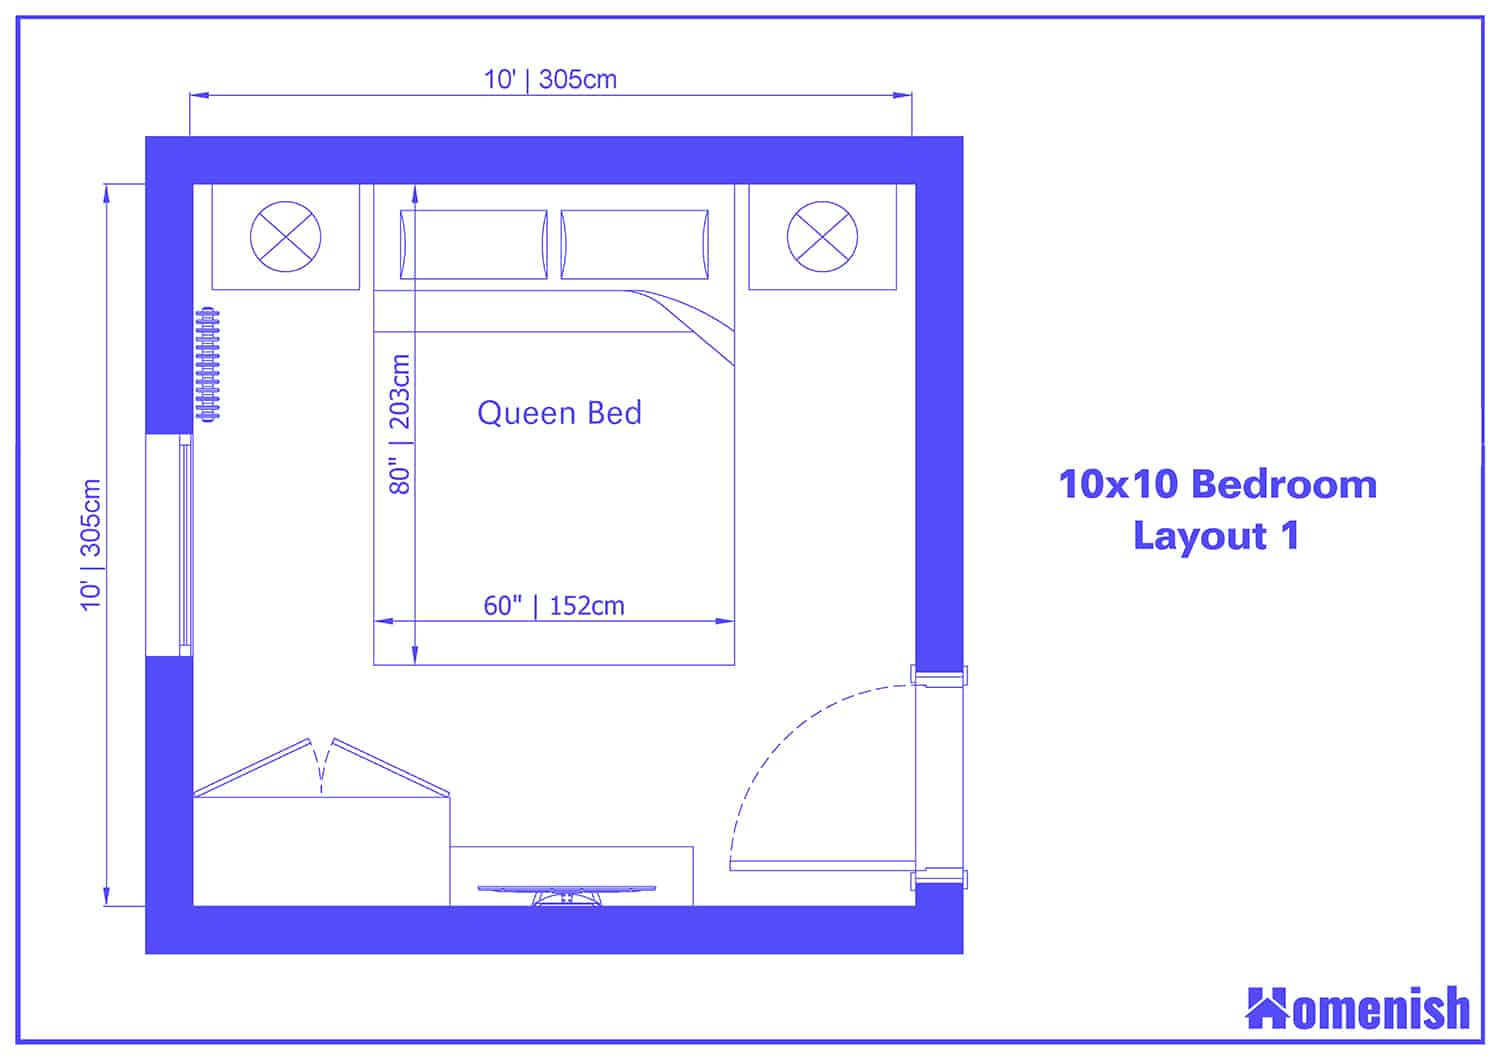 20 Best 20x20 Bedroom Layouts For Small Rooms with 20 Floor Plans ...